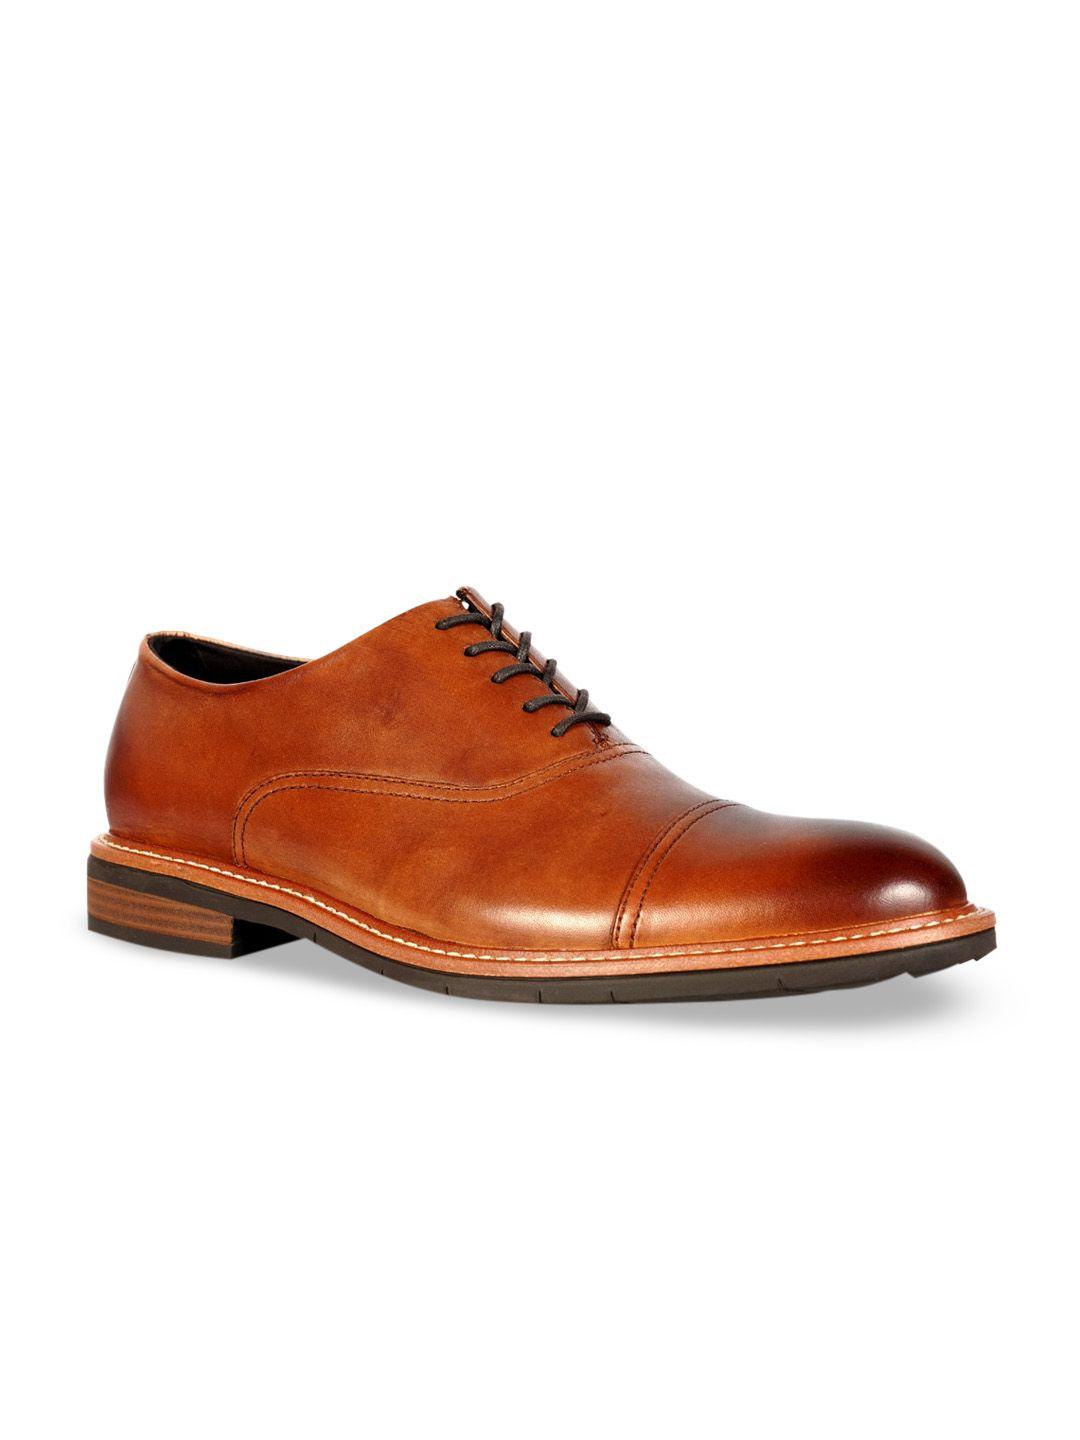 kenneth-cole-men-brown-solid-leather-formal-oxfords